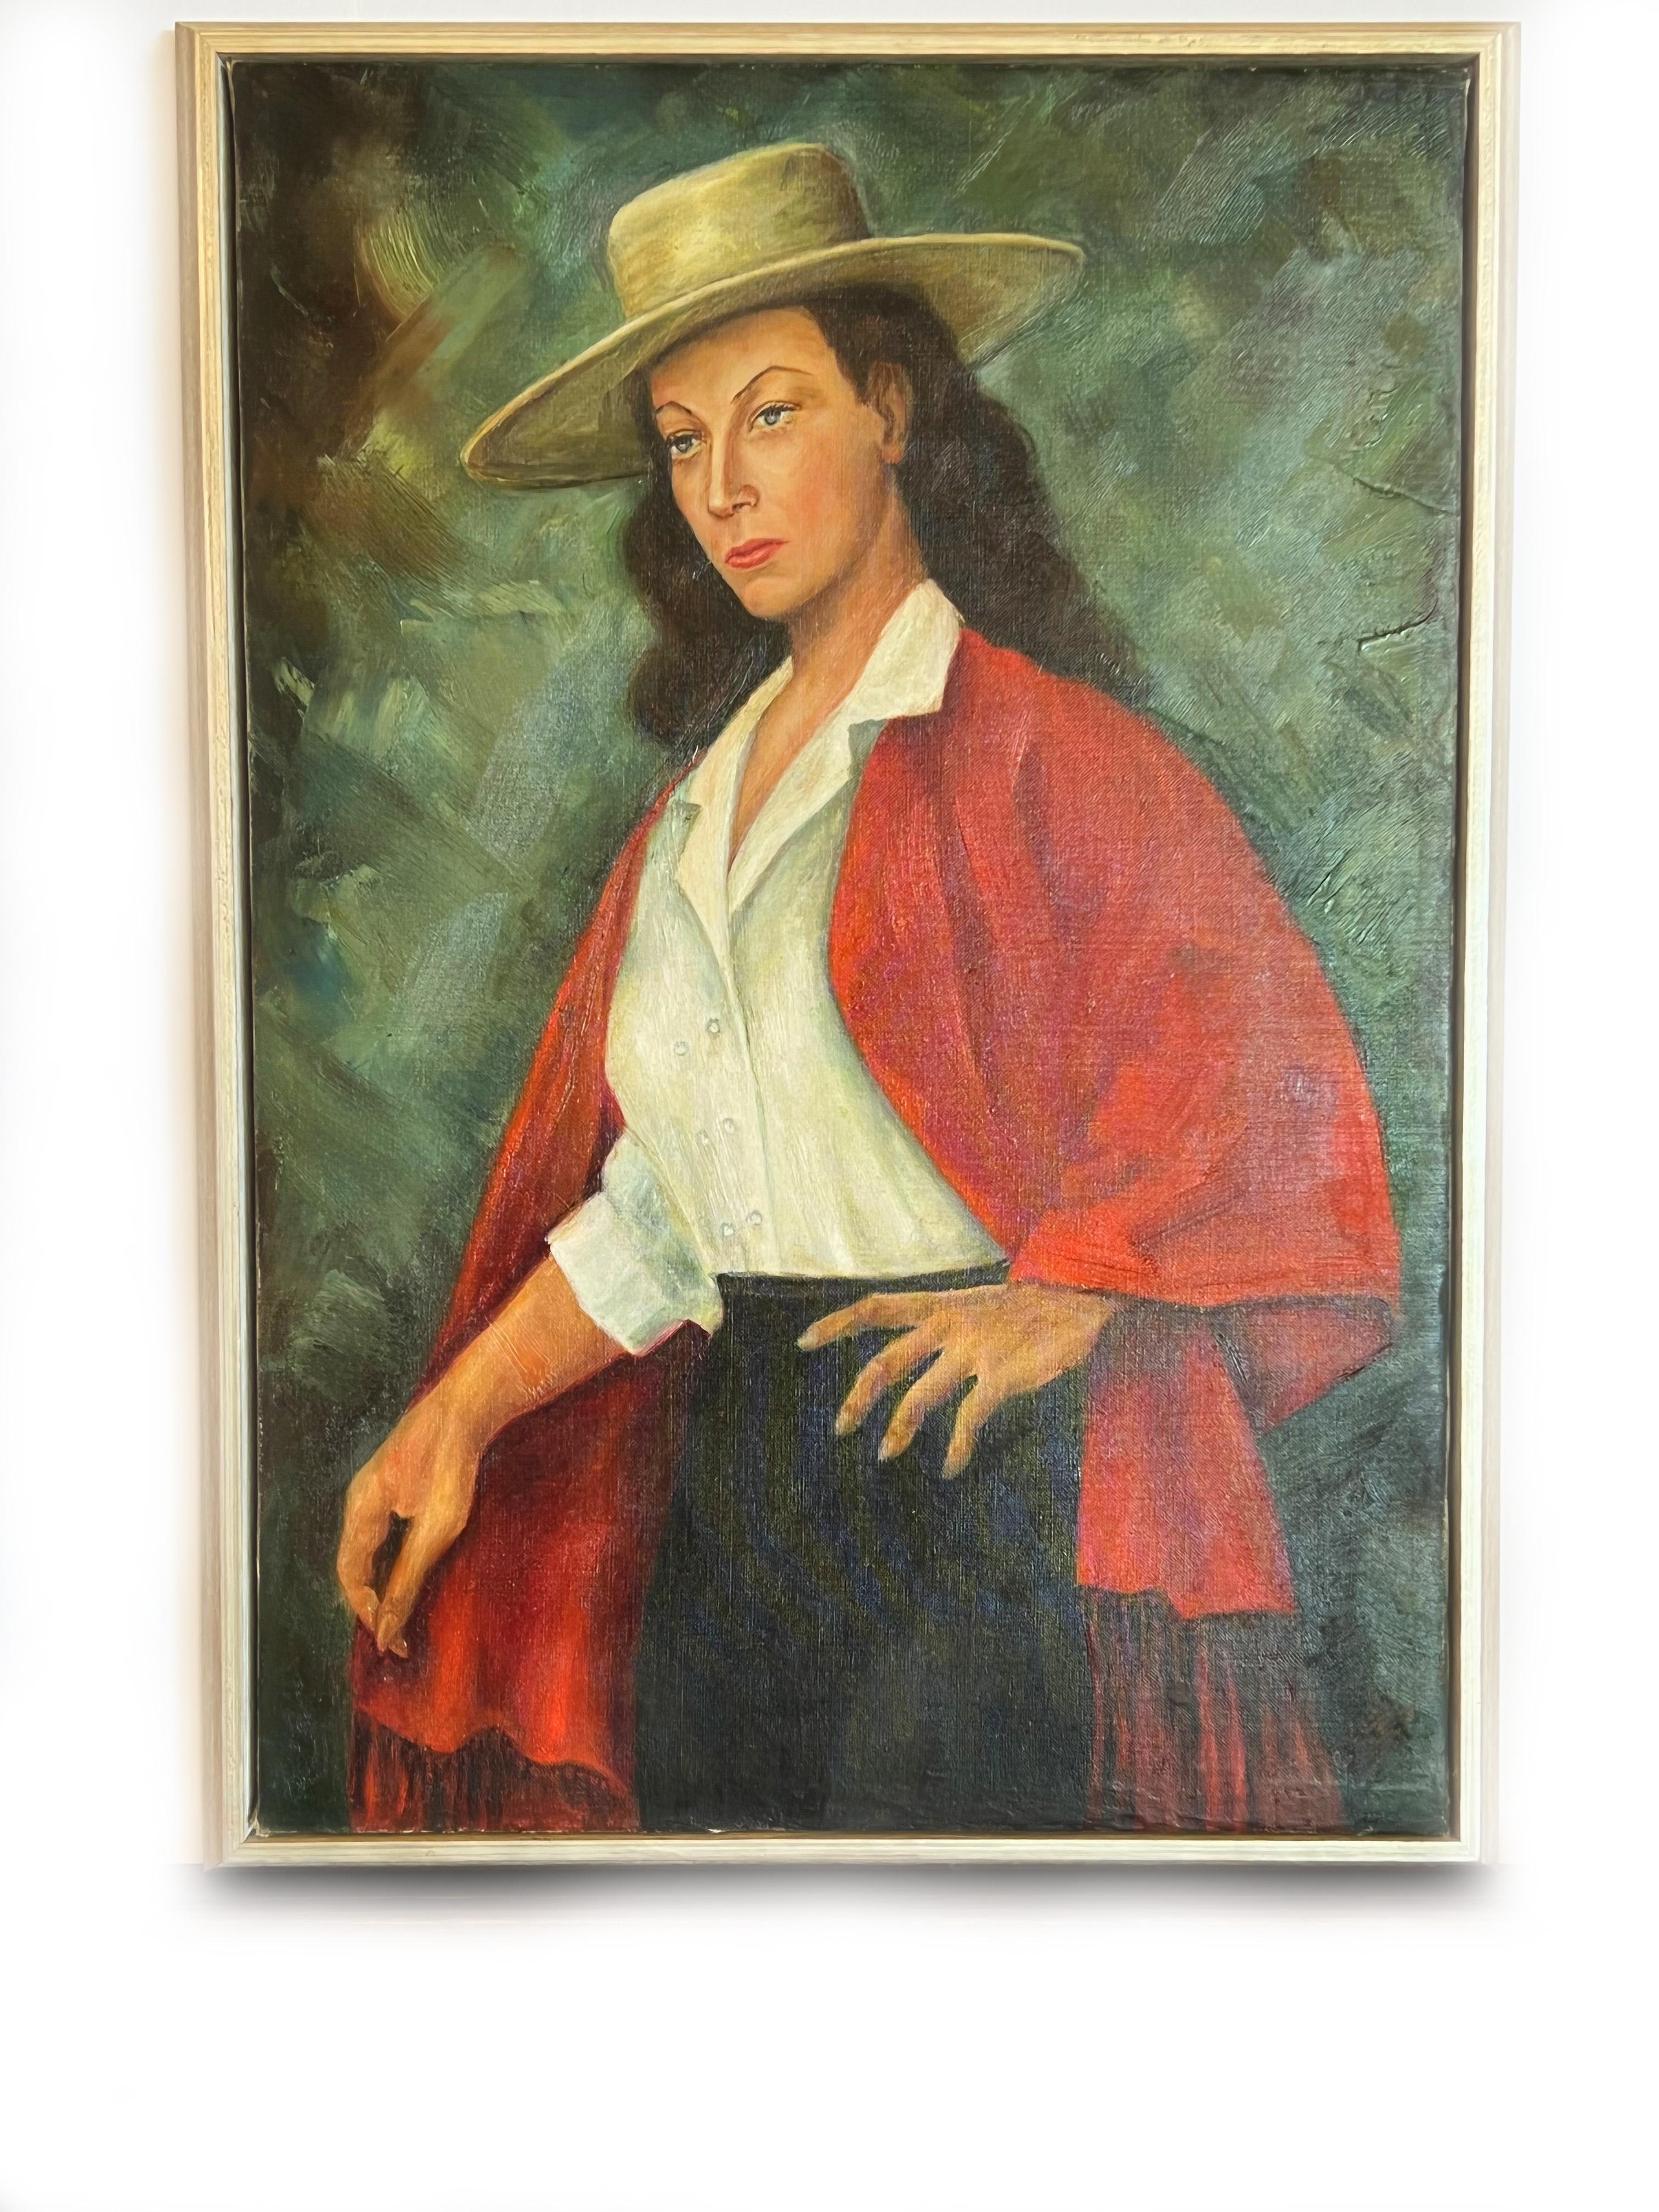 Unknown Figurative Painting - "Amazon" Horsewoman Portrait  - Oil Painting on Canvas